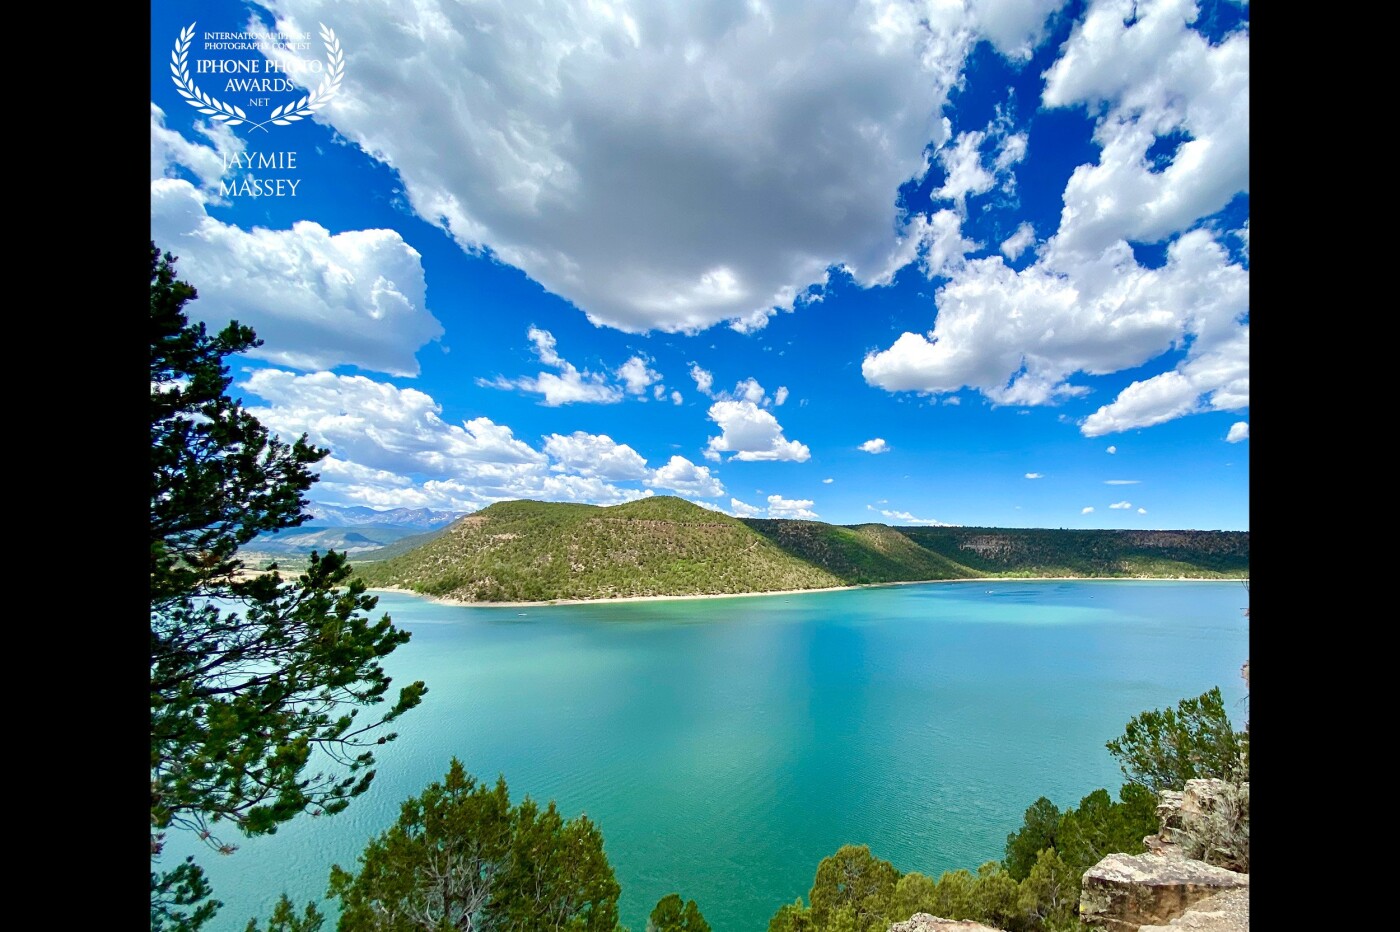 Hidden Gem: Beauty is everywhere at Ridgeway State Park in Colorado including this crystal blue lake. The water is clear cool and refreshing.